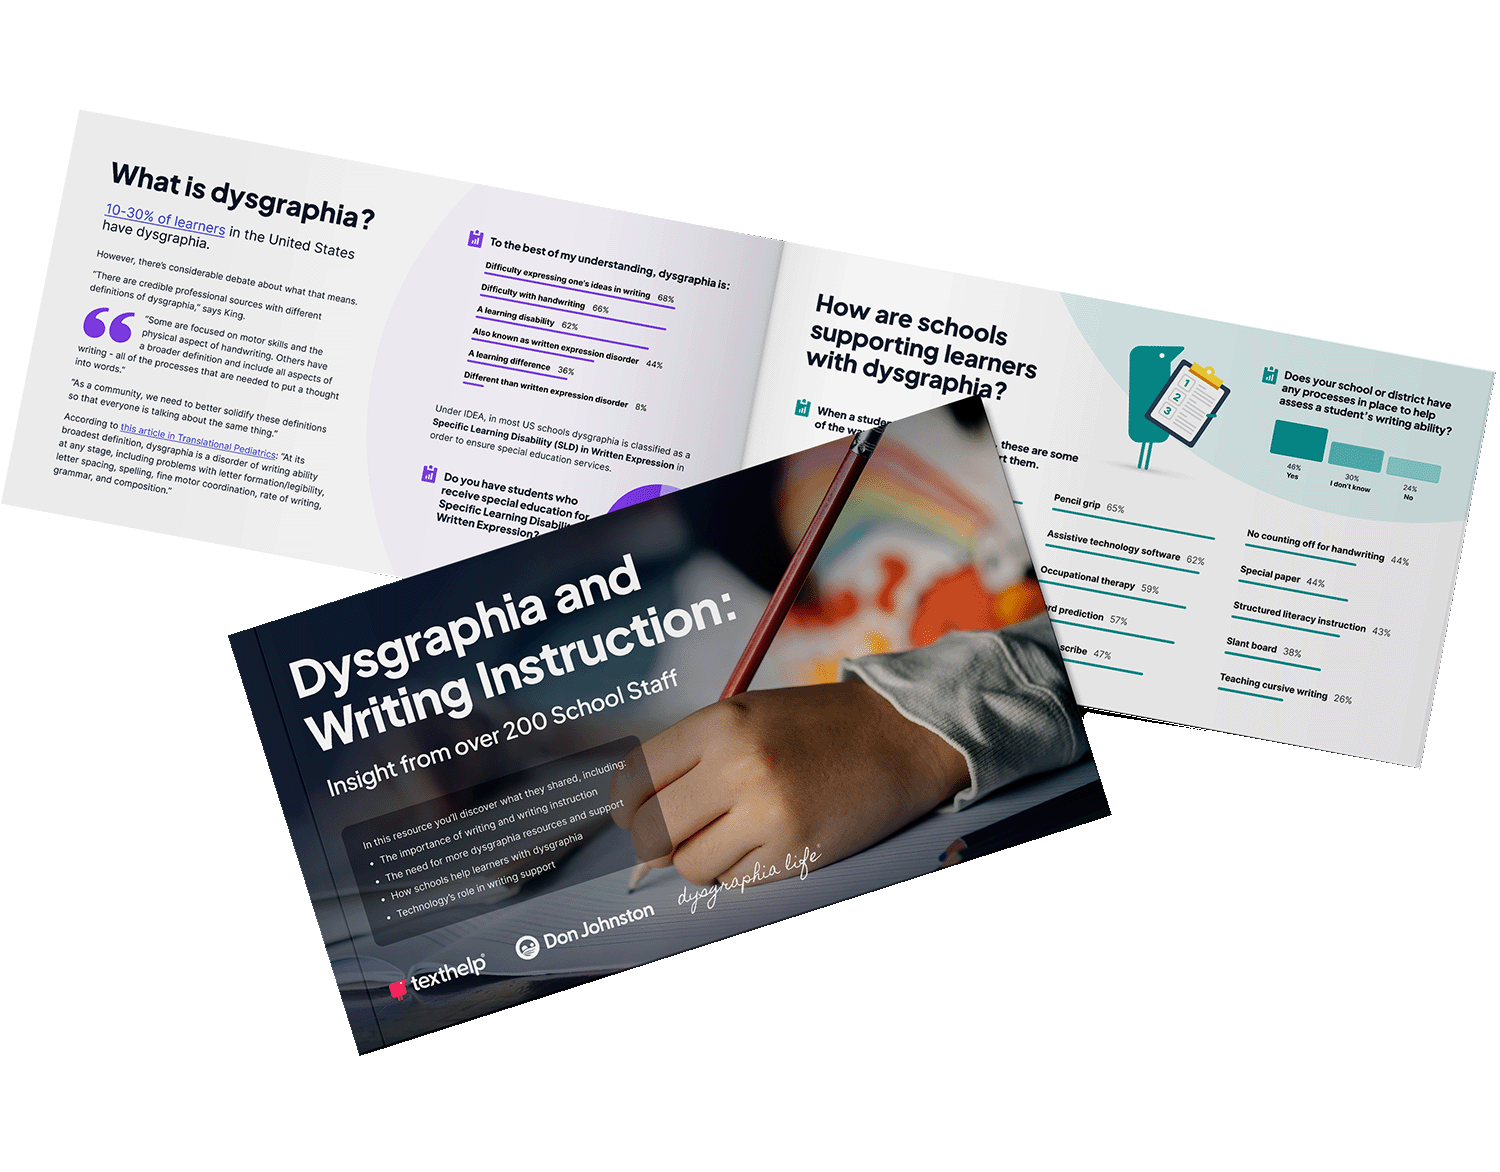 Mockup of the Dysgraphia and Writing Instruction  PDF cover and inside pages